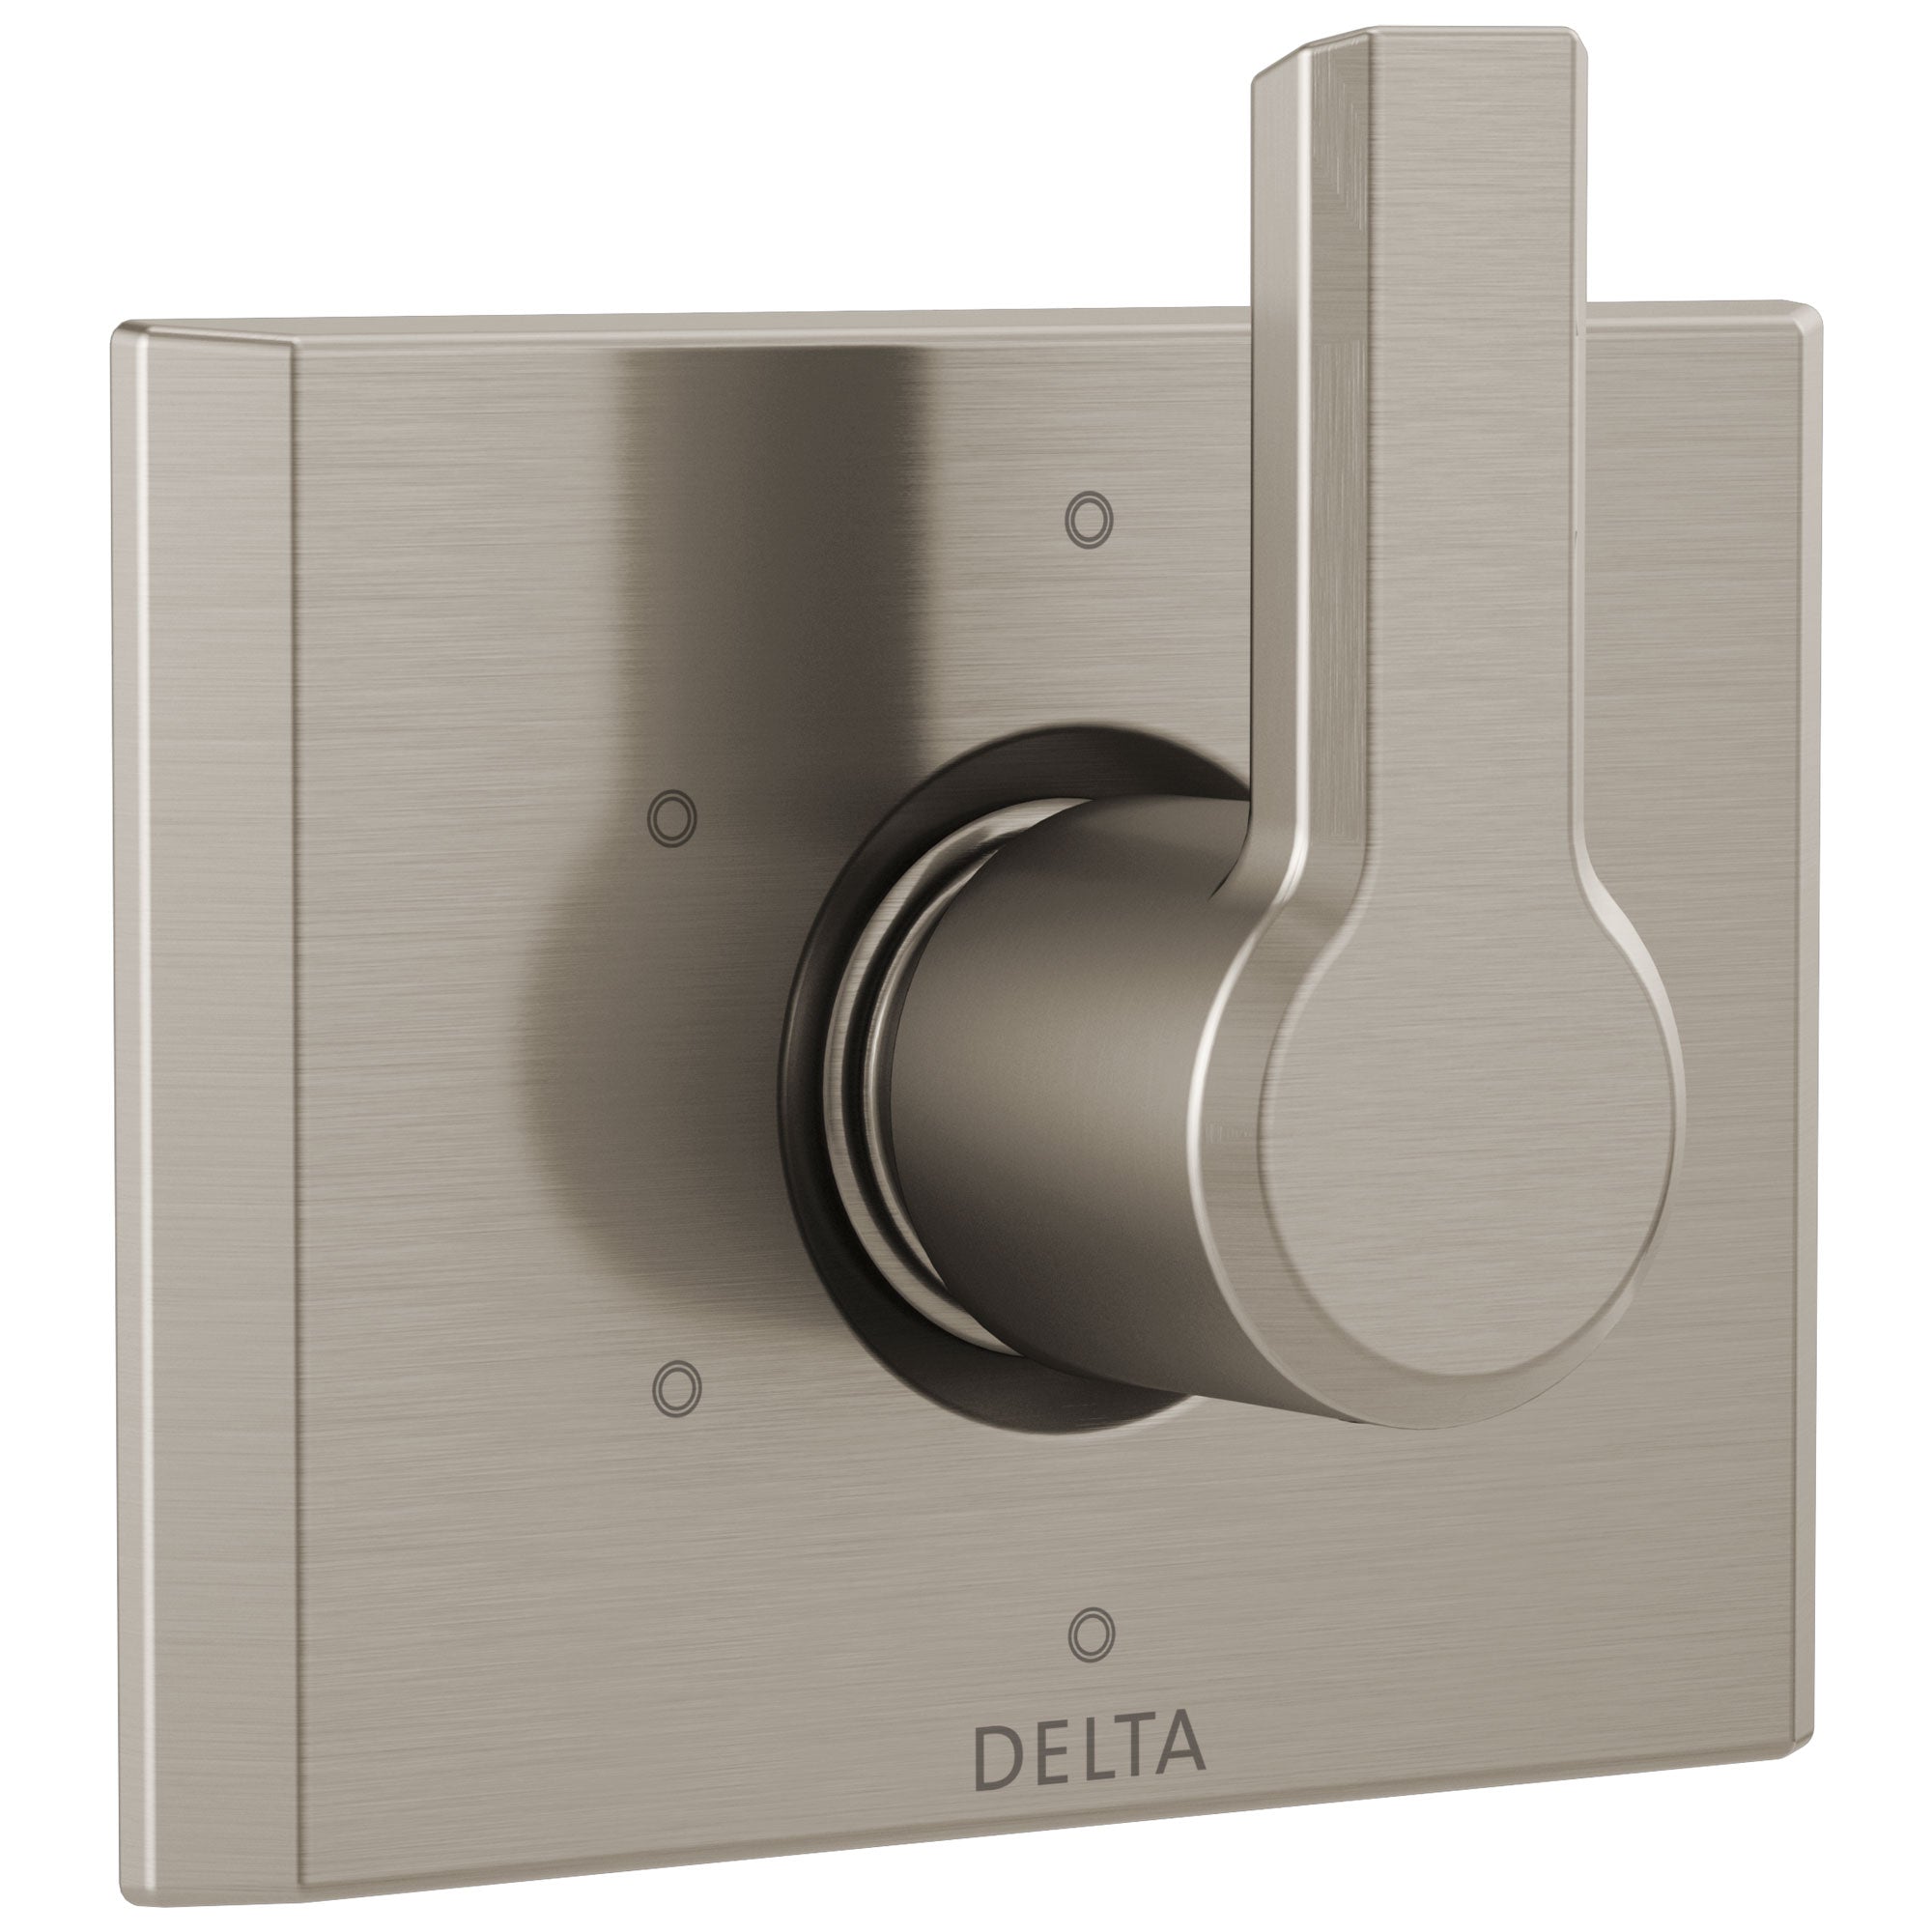 Delta Pivotal Modern Stainless Steel Finish 6-Setting 3 Outlet Port Shower System Diverter Includes Lever Handle and Rough-in Valve D3559V